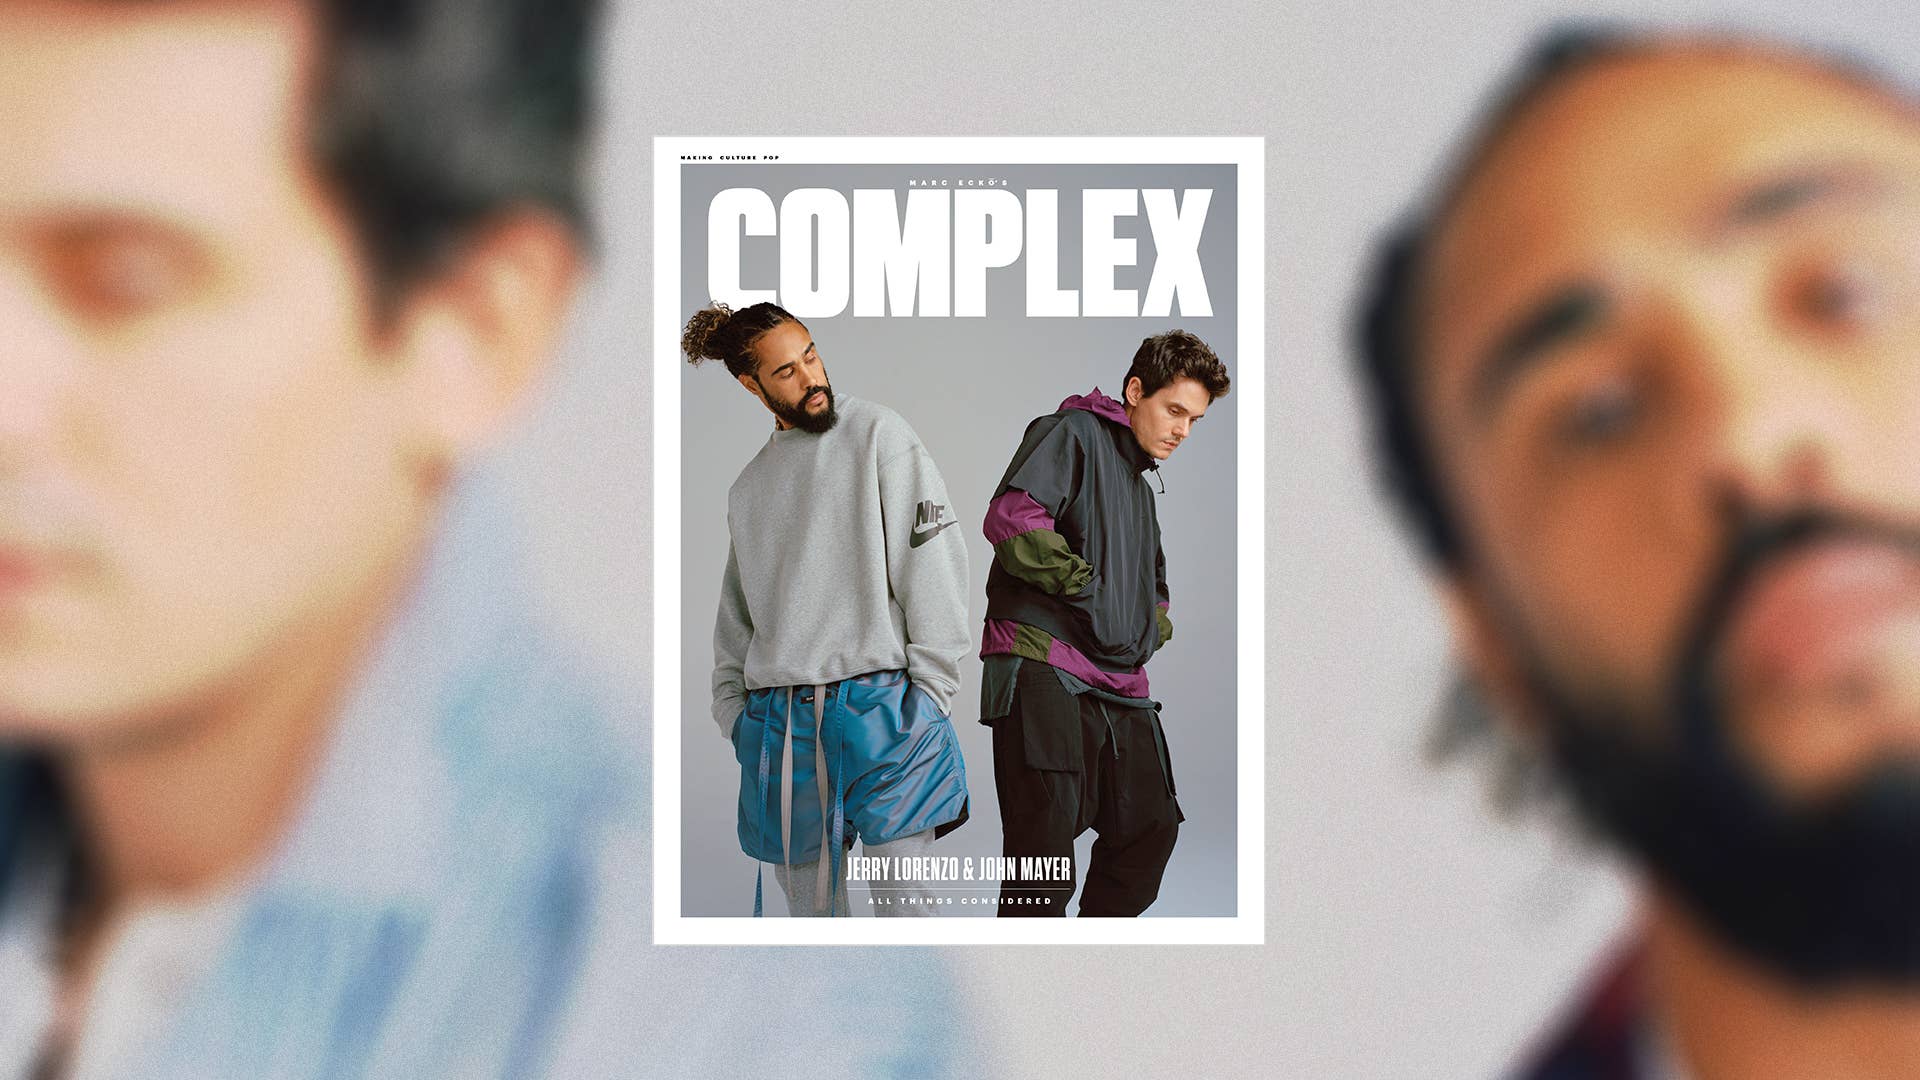 Jerry Lorenzo and John Mayer: All Things Considered